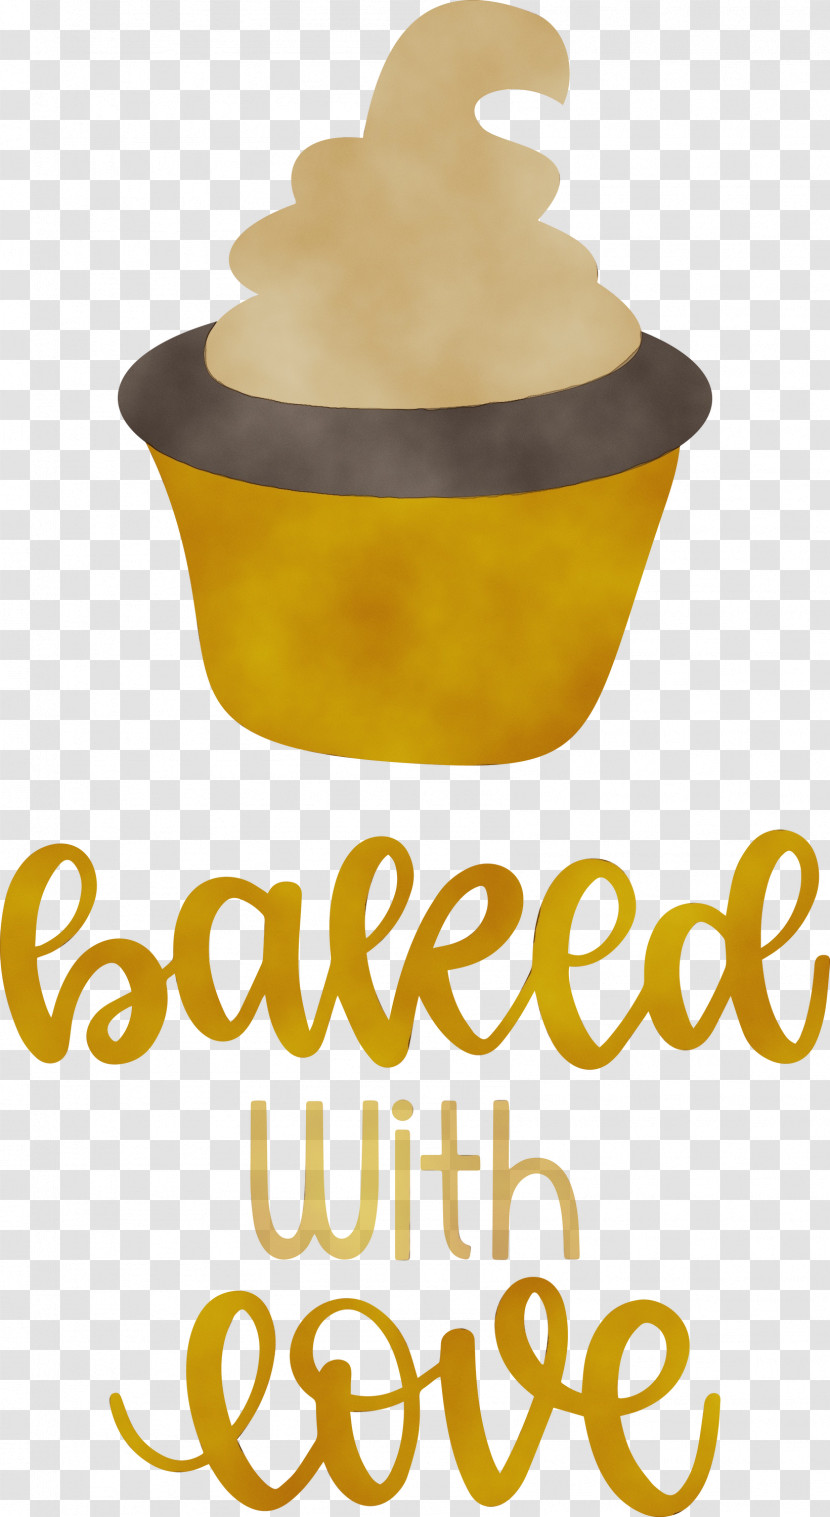 Yellow Cookware And Bakeware Meter Cream Transparent PNG